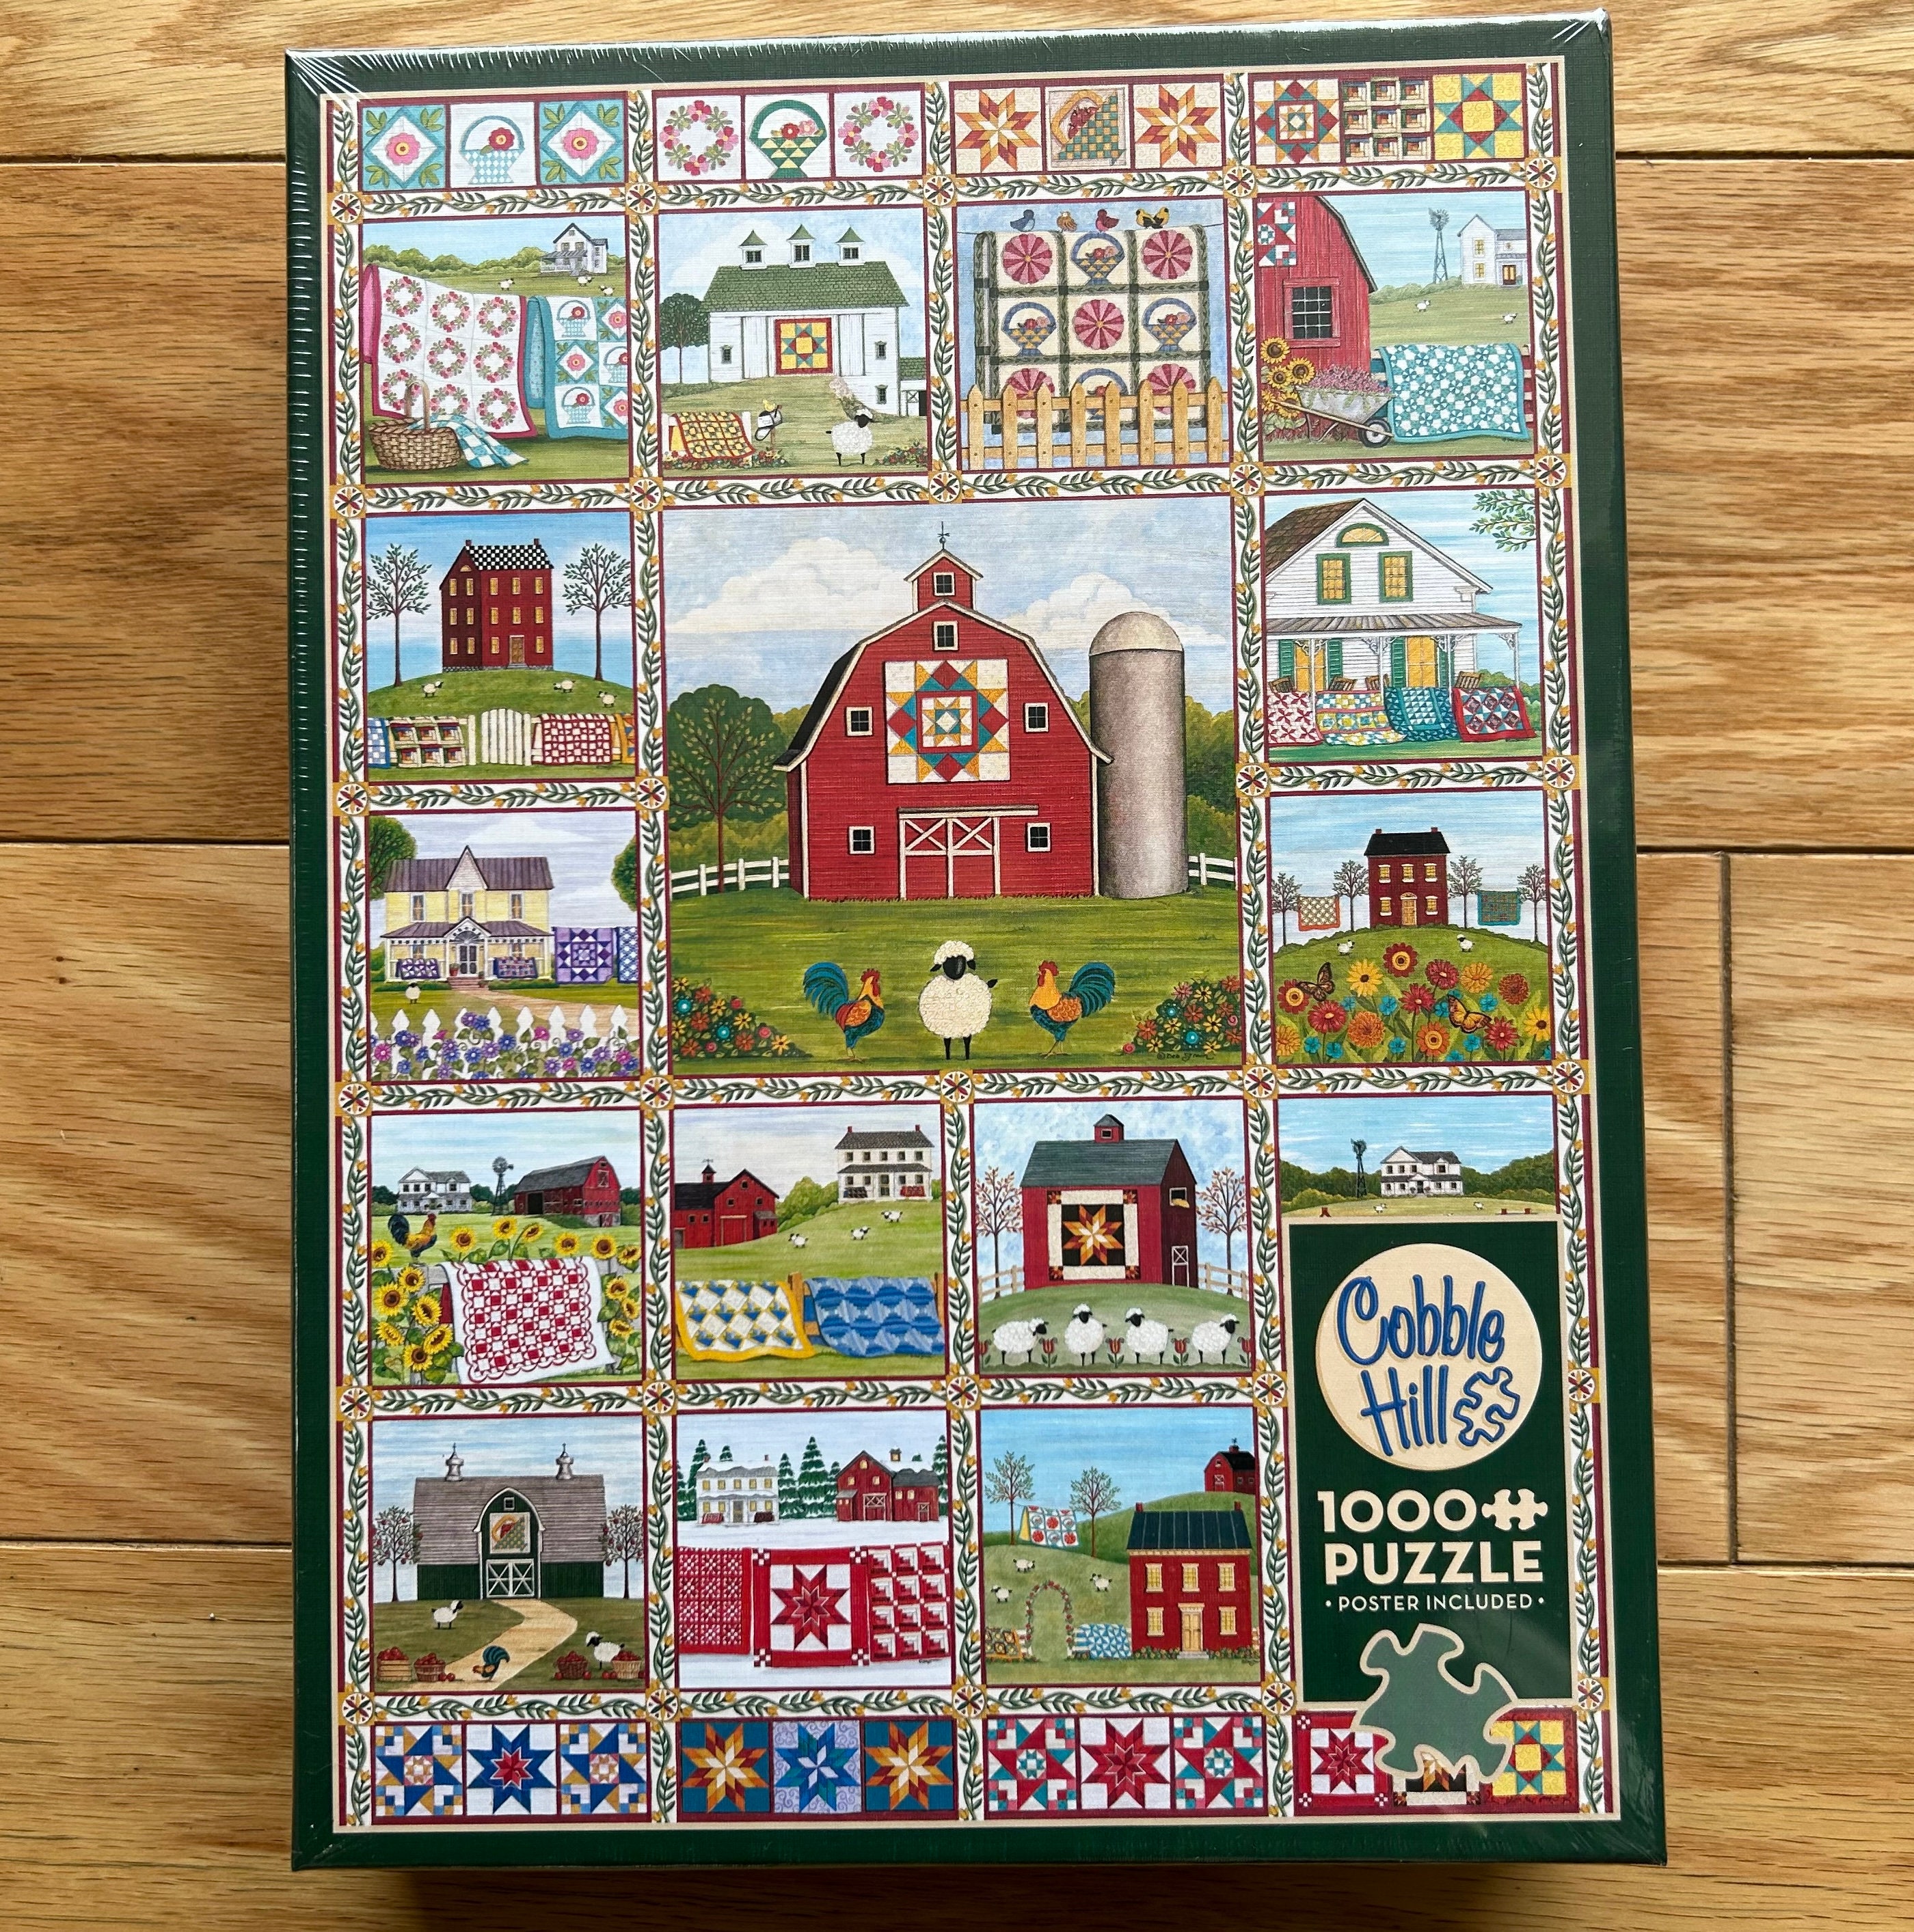 Fishing Adventures — Cobble Hill Puzzles